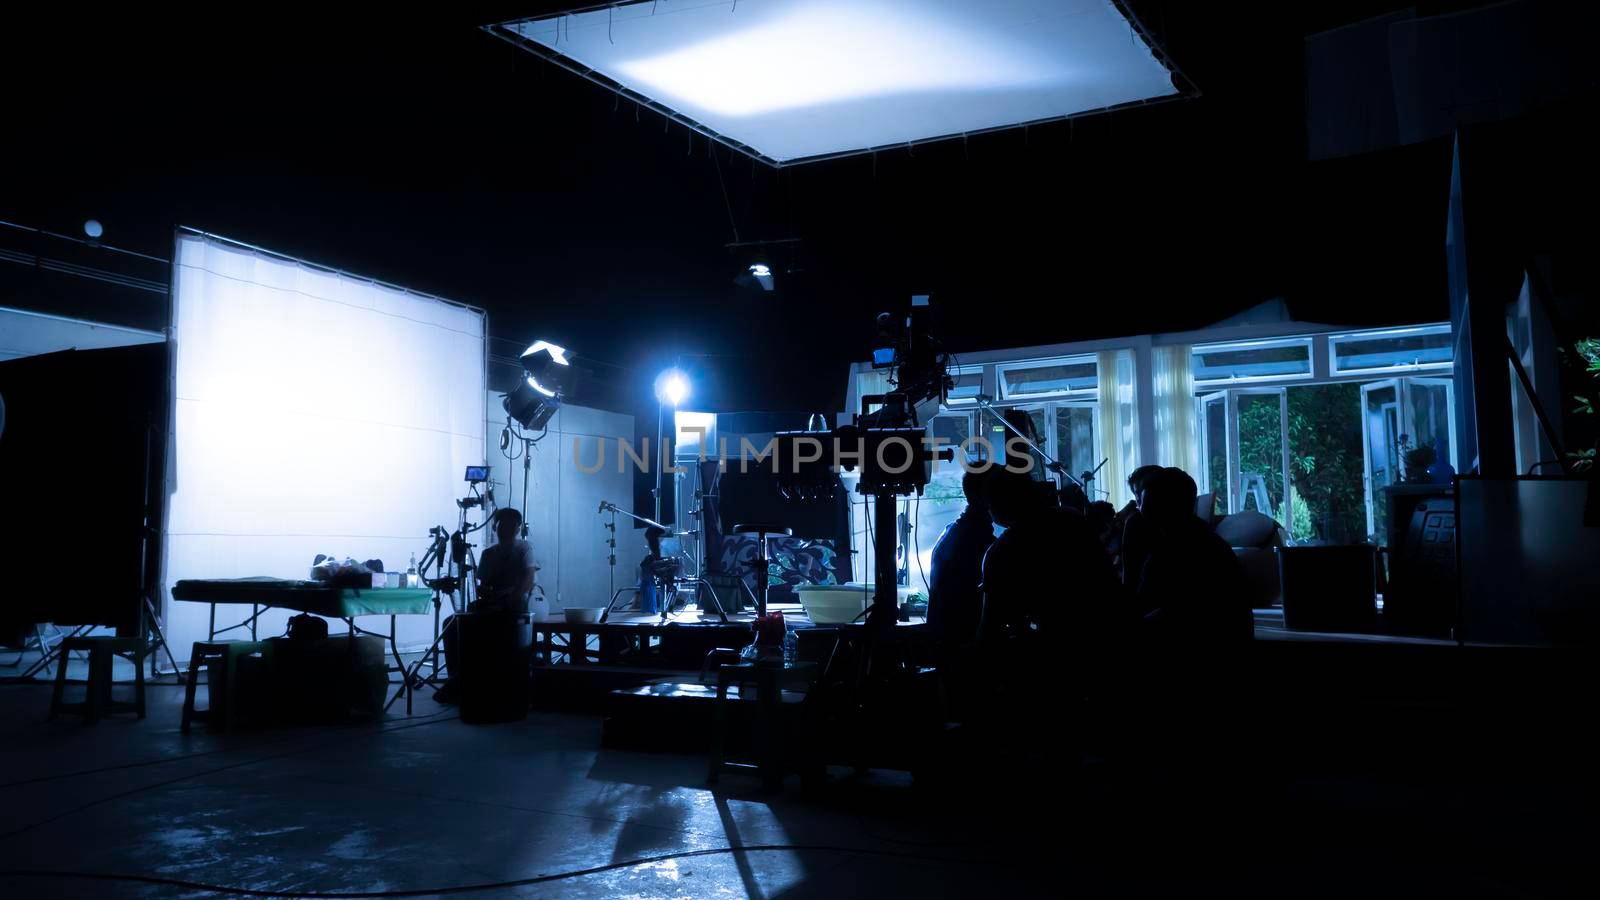 Silhouette images of video production behind the scenes or b-roll or making of TV commercial movies that film crew team lightman and videos cameraman working together with movie director in studio.